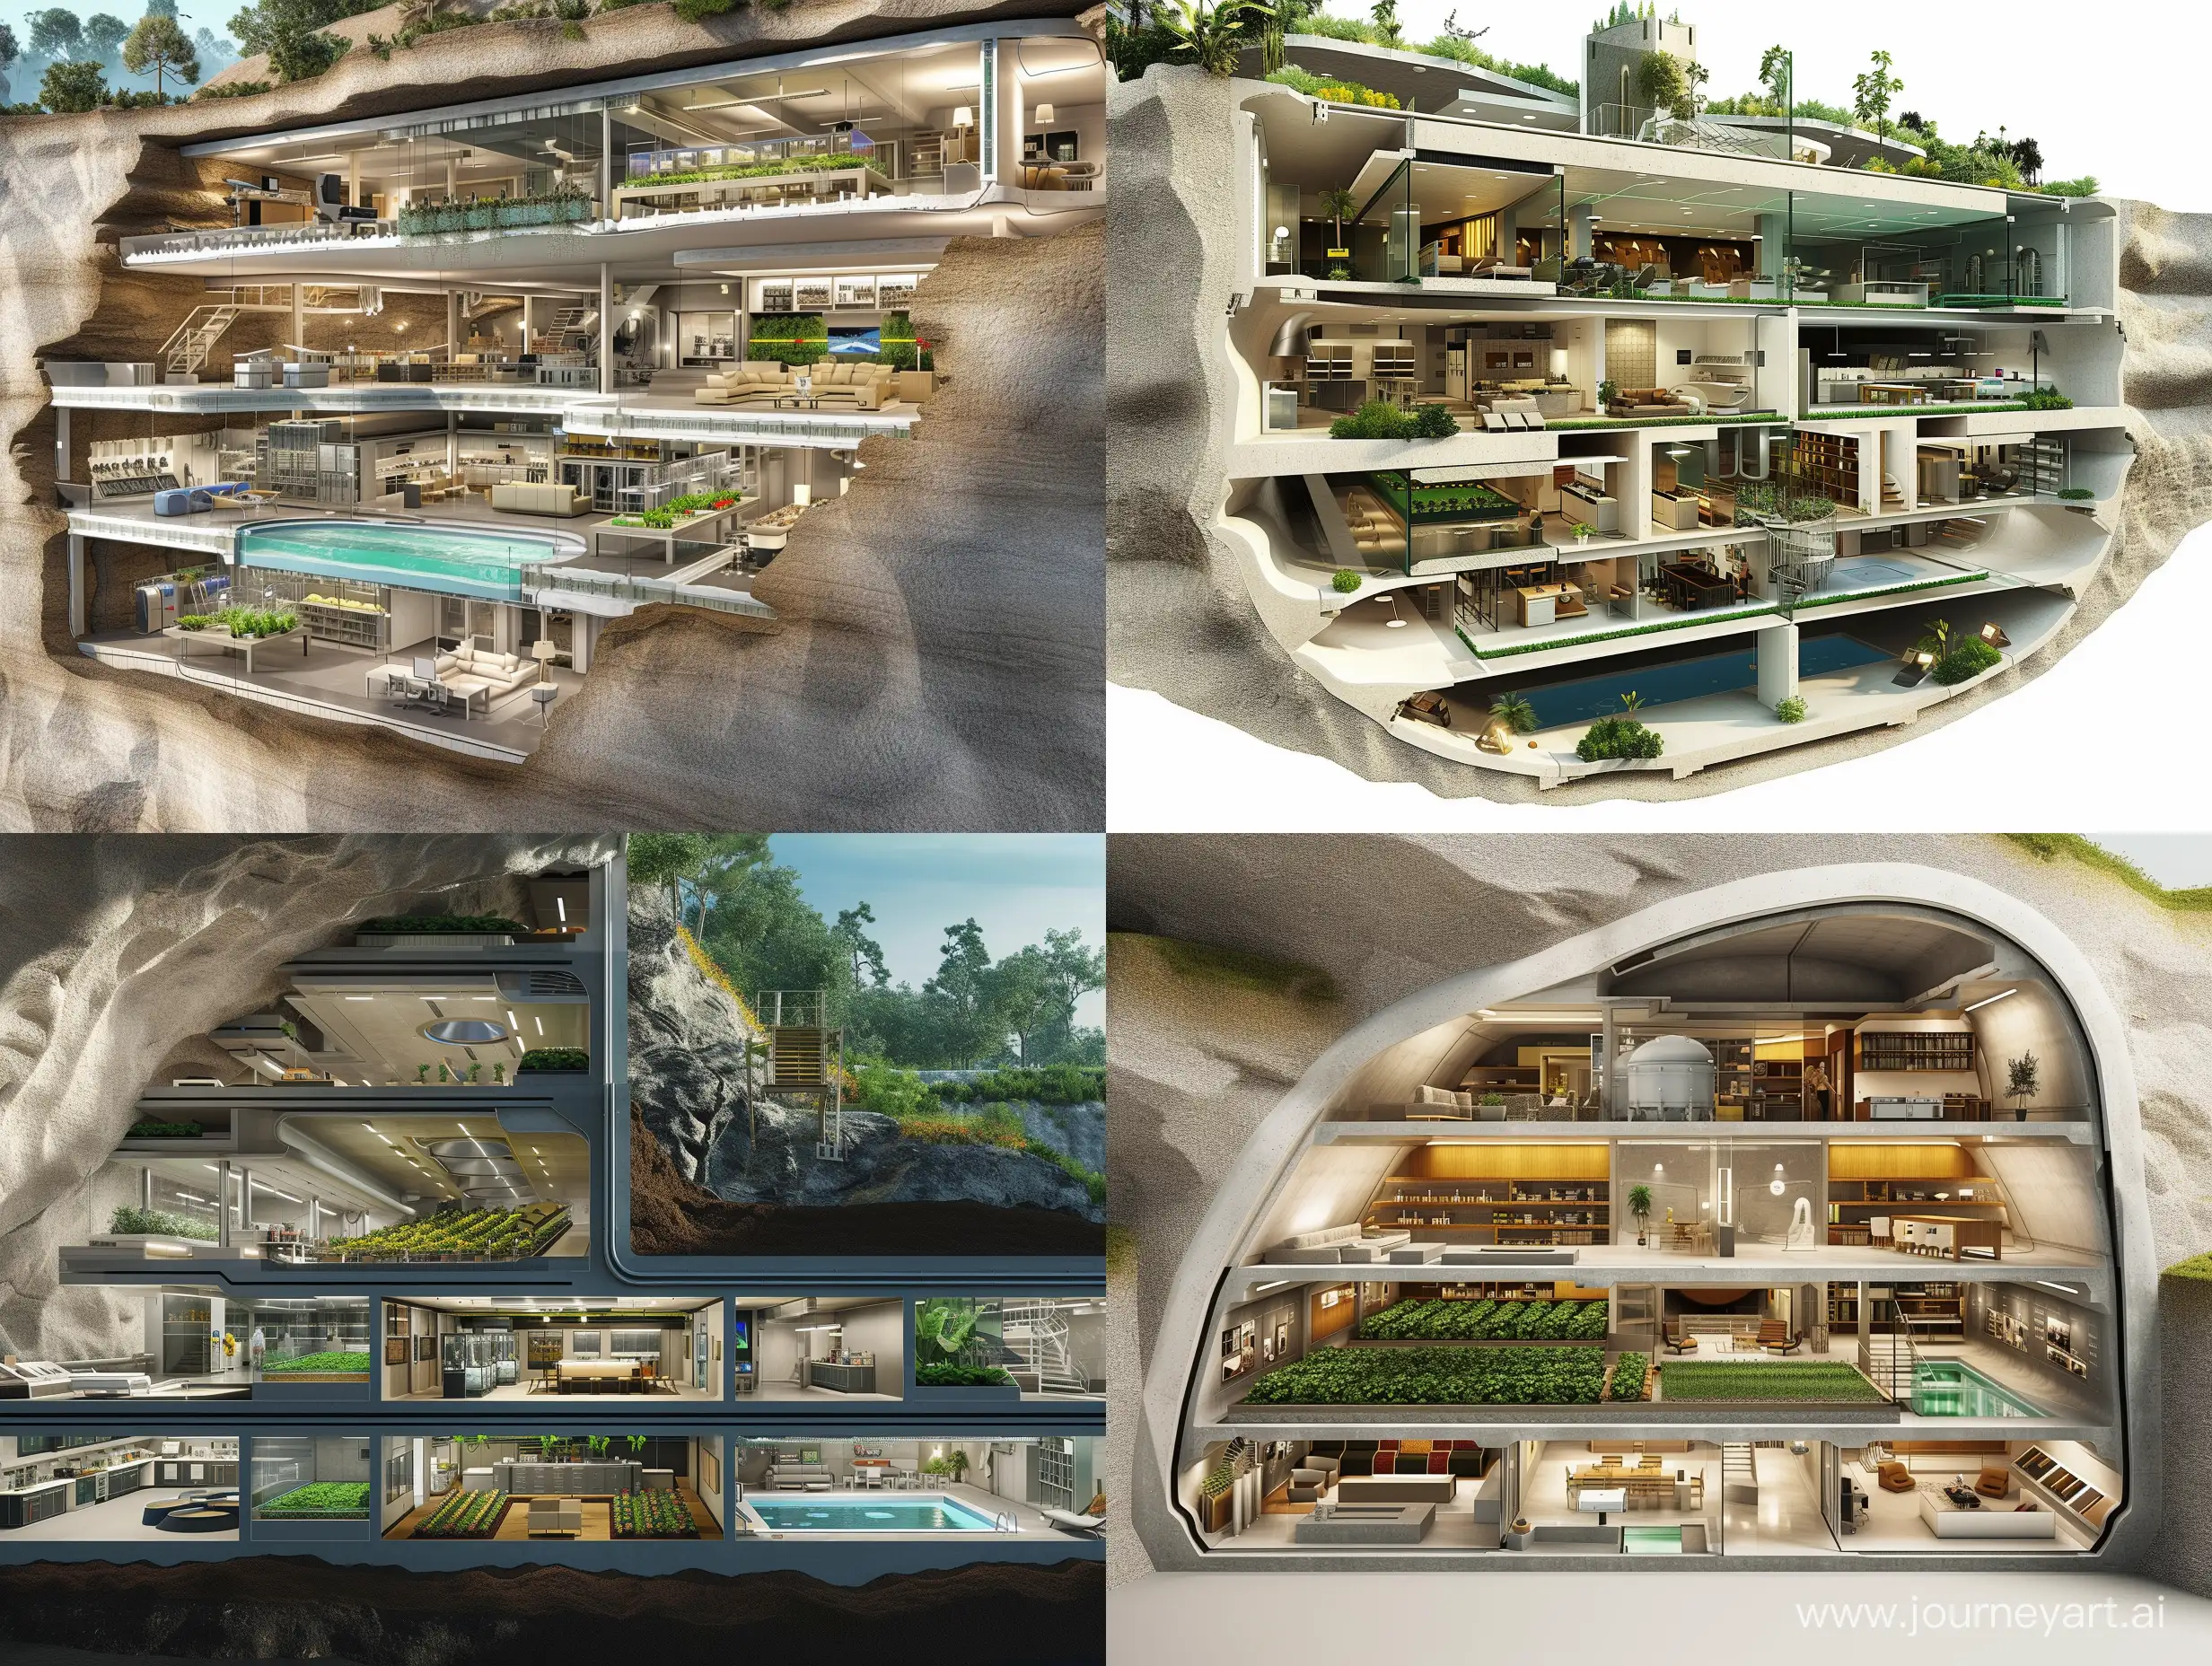 Cutaway side view of massive underground residence, includes living areas, entertainment areas, bedrooms, kitchens, indoor gardening for food production, swimming pool, mysterious laboratories; luxurious state of the art bunker.